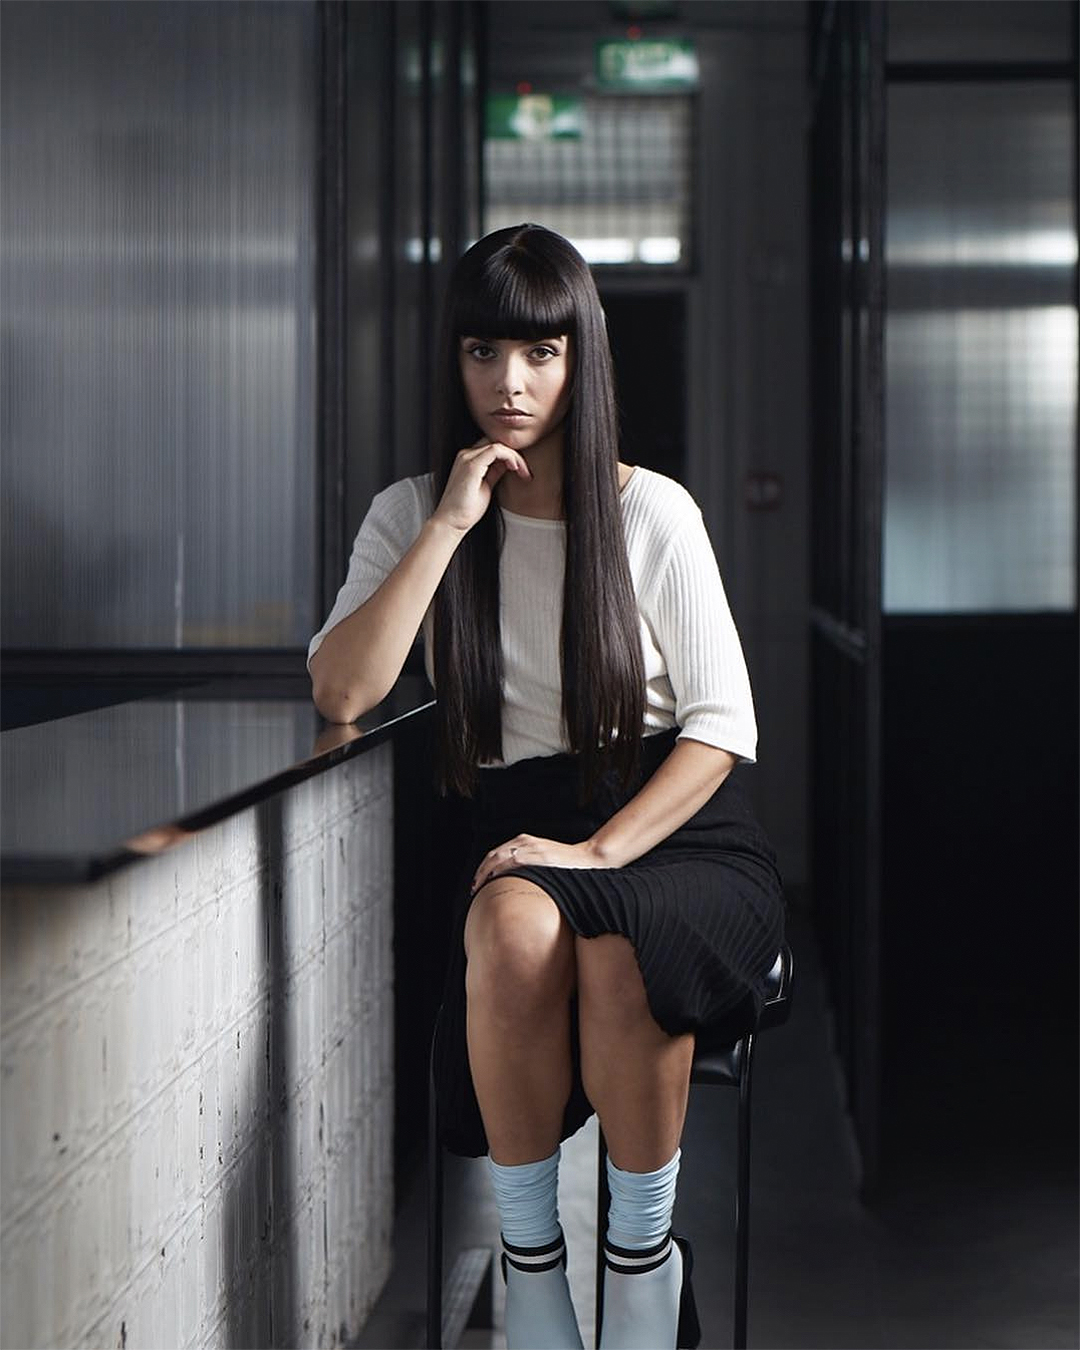 A woman sits on a stool with impeccably combed long dark hair.